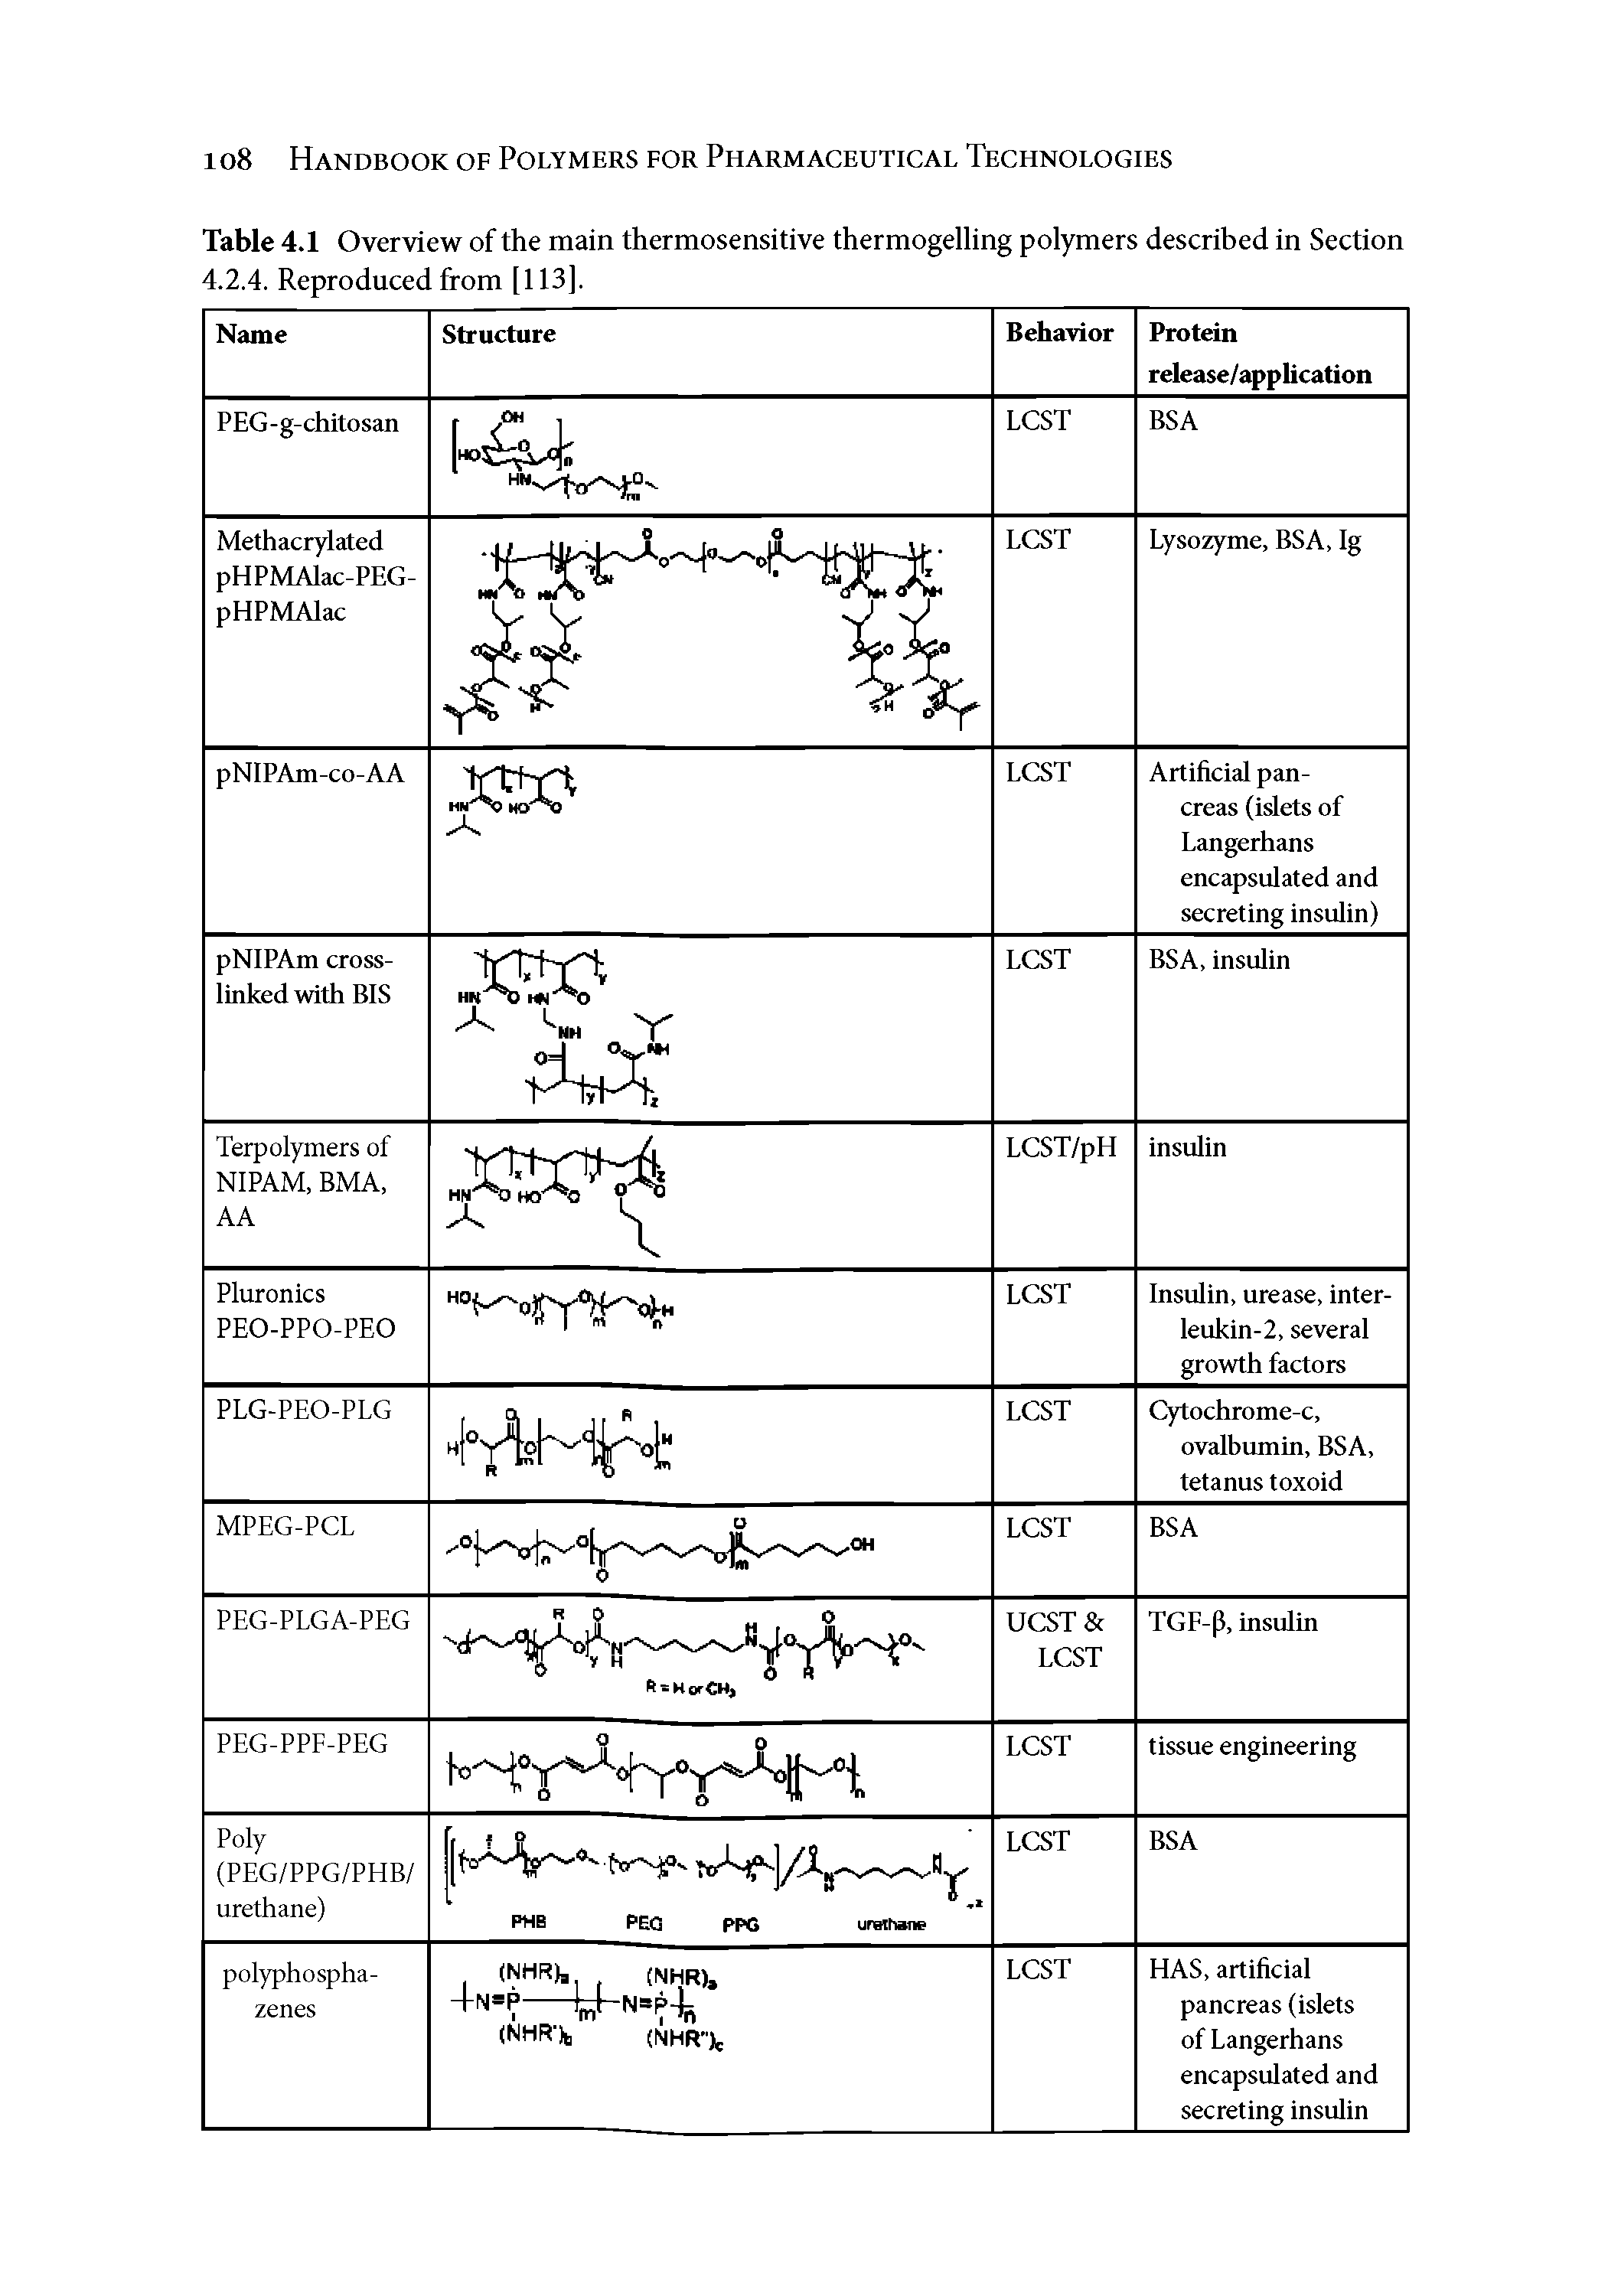 Table 4.1 Overview of the main thermosensitive thermogelling polymers described in Section 4.2.4. Reproduced from [113].